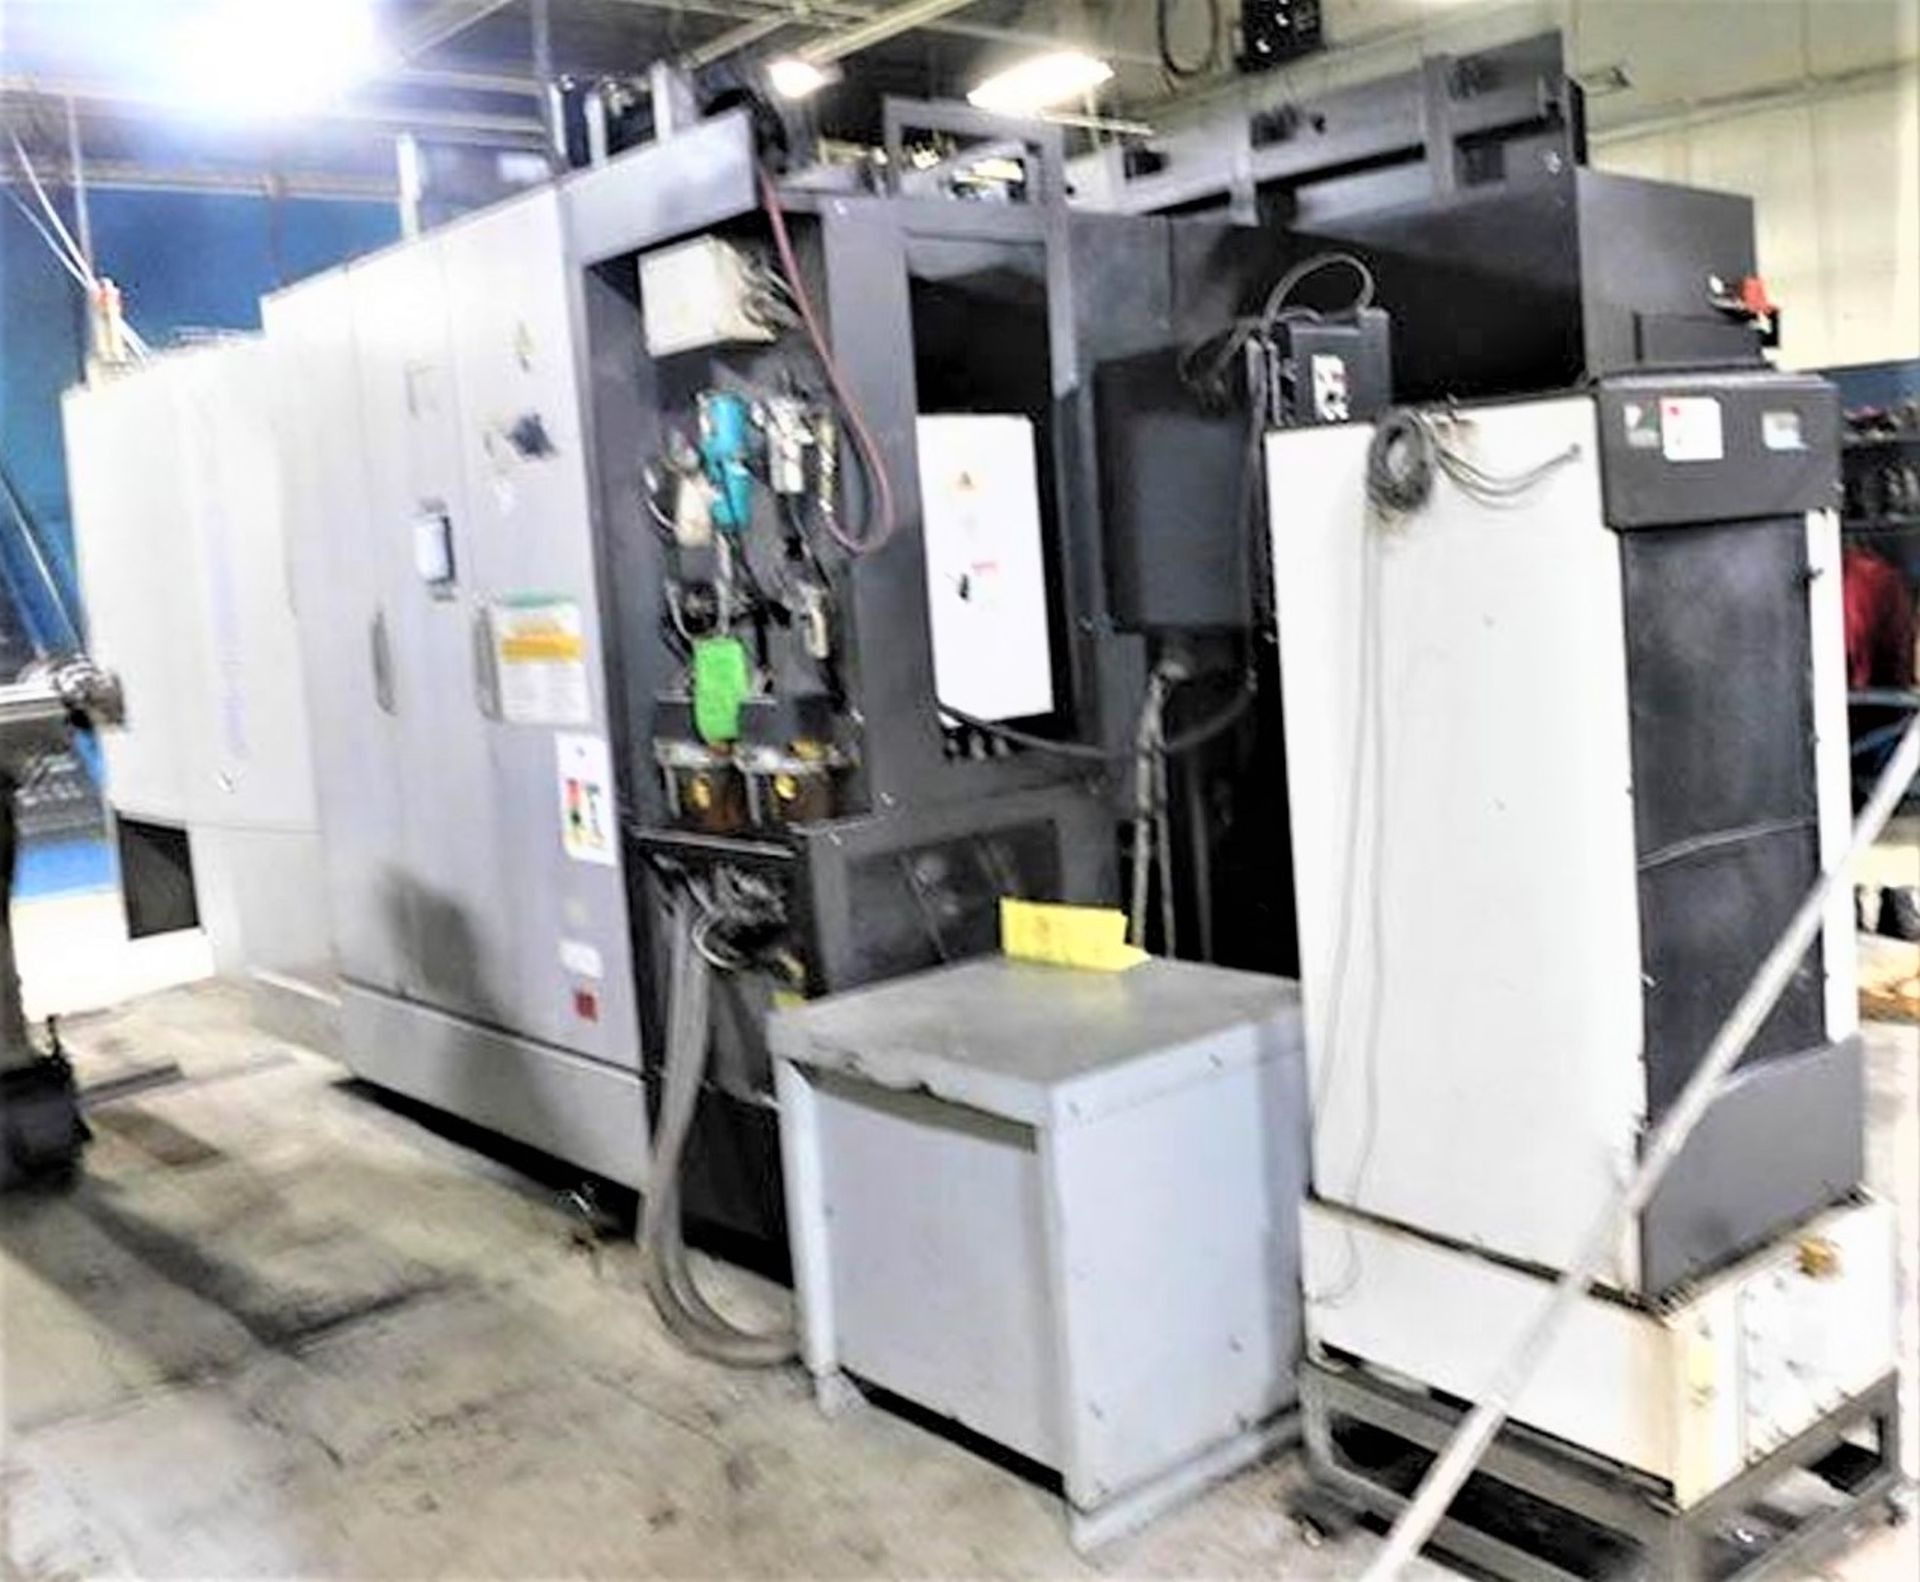 24.8 X 24.8 Pallets Toyoda FH630SX CNC 4-Axis Horizontal Machining Center, S/N NS1429, New 12/2005 - Image 10 of 14